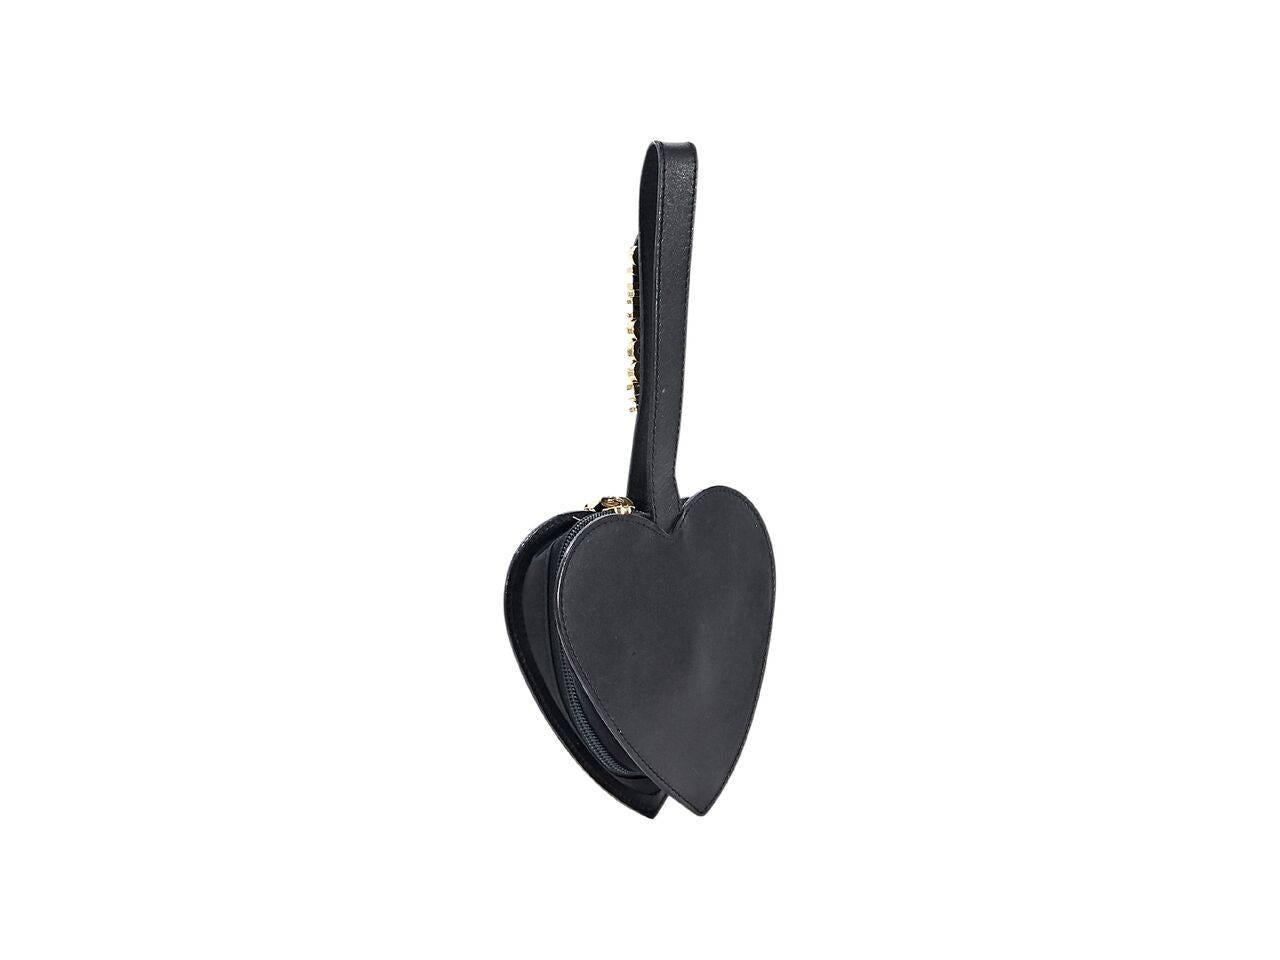 Product details:  Black leather heart wristlet by Moschino.  Accented with logo hardware.  Wristlet strap.  Zip closure.  Goldtone hardware.  6